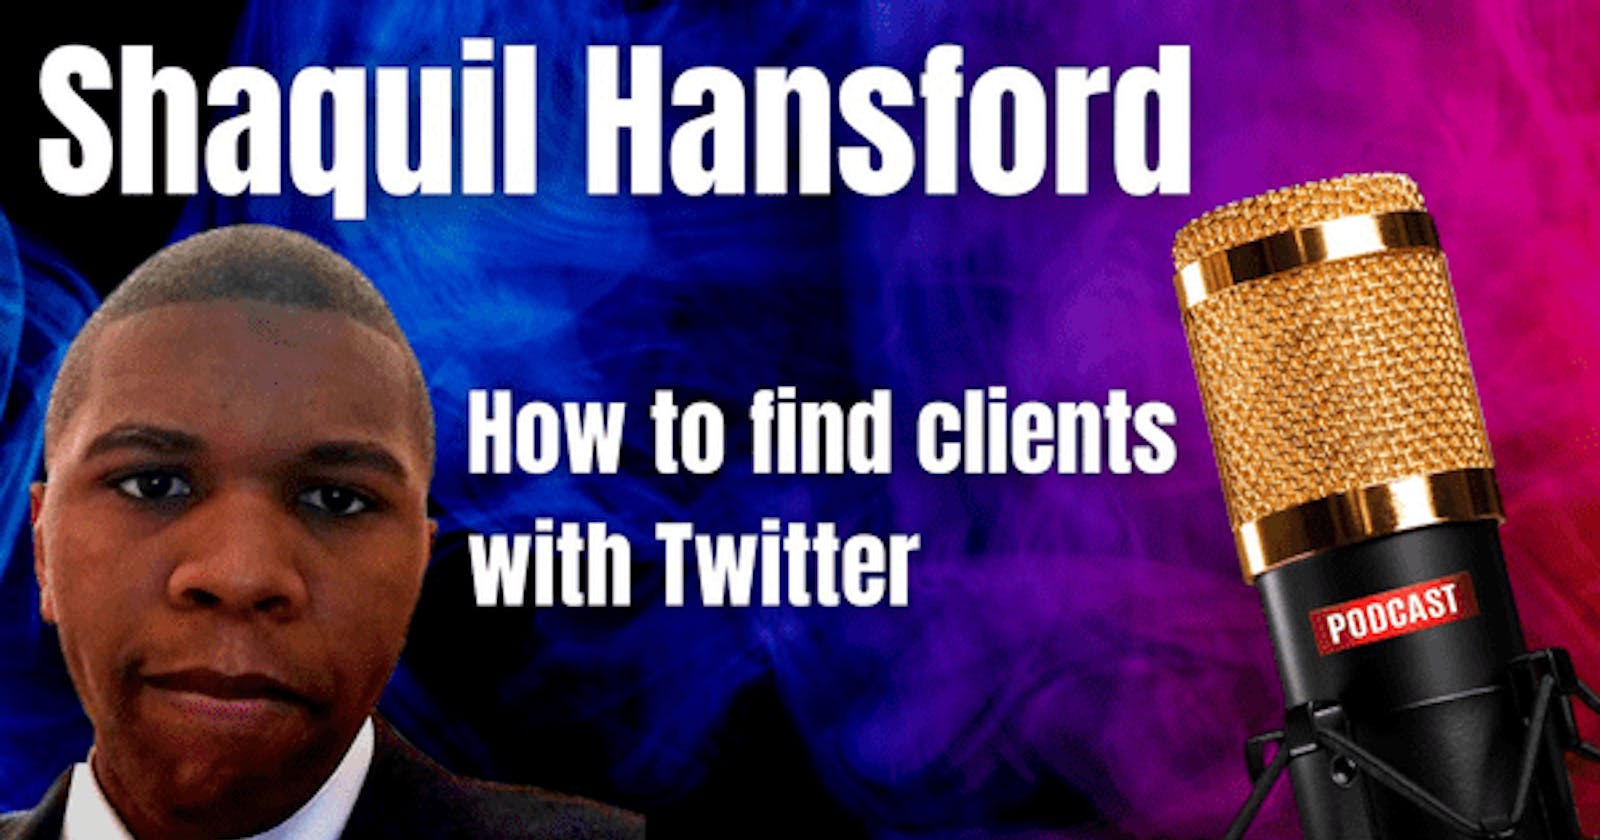 Shaquil Hansford: Freelancing guidance from a professional graphic design contractor